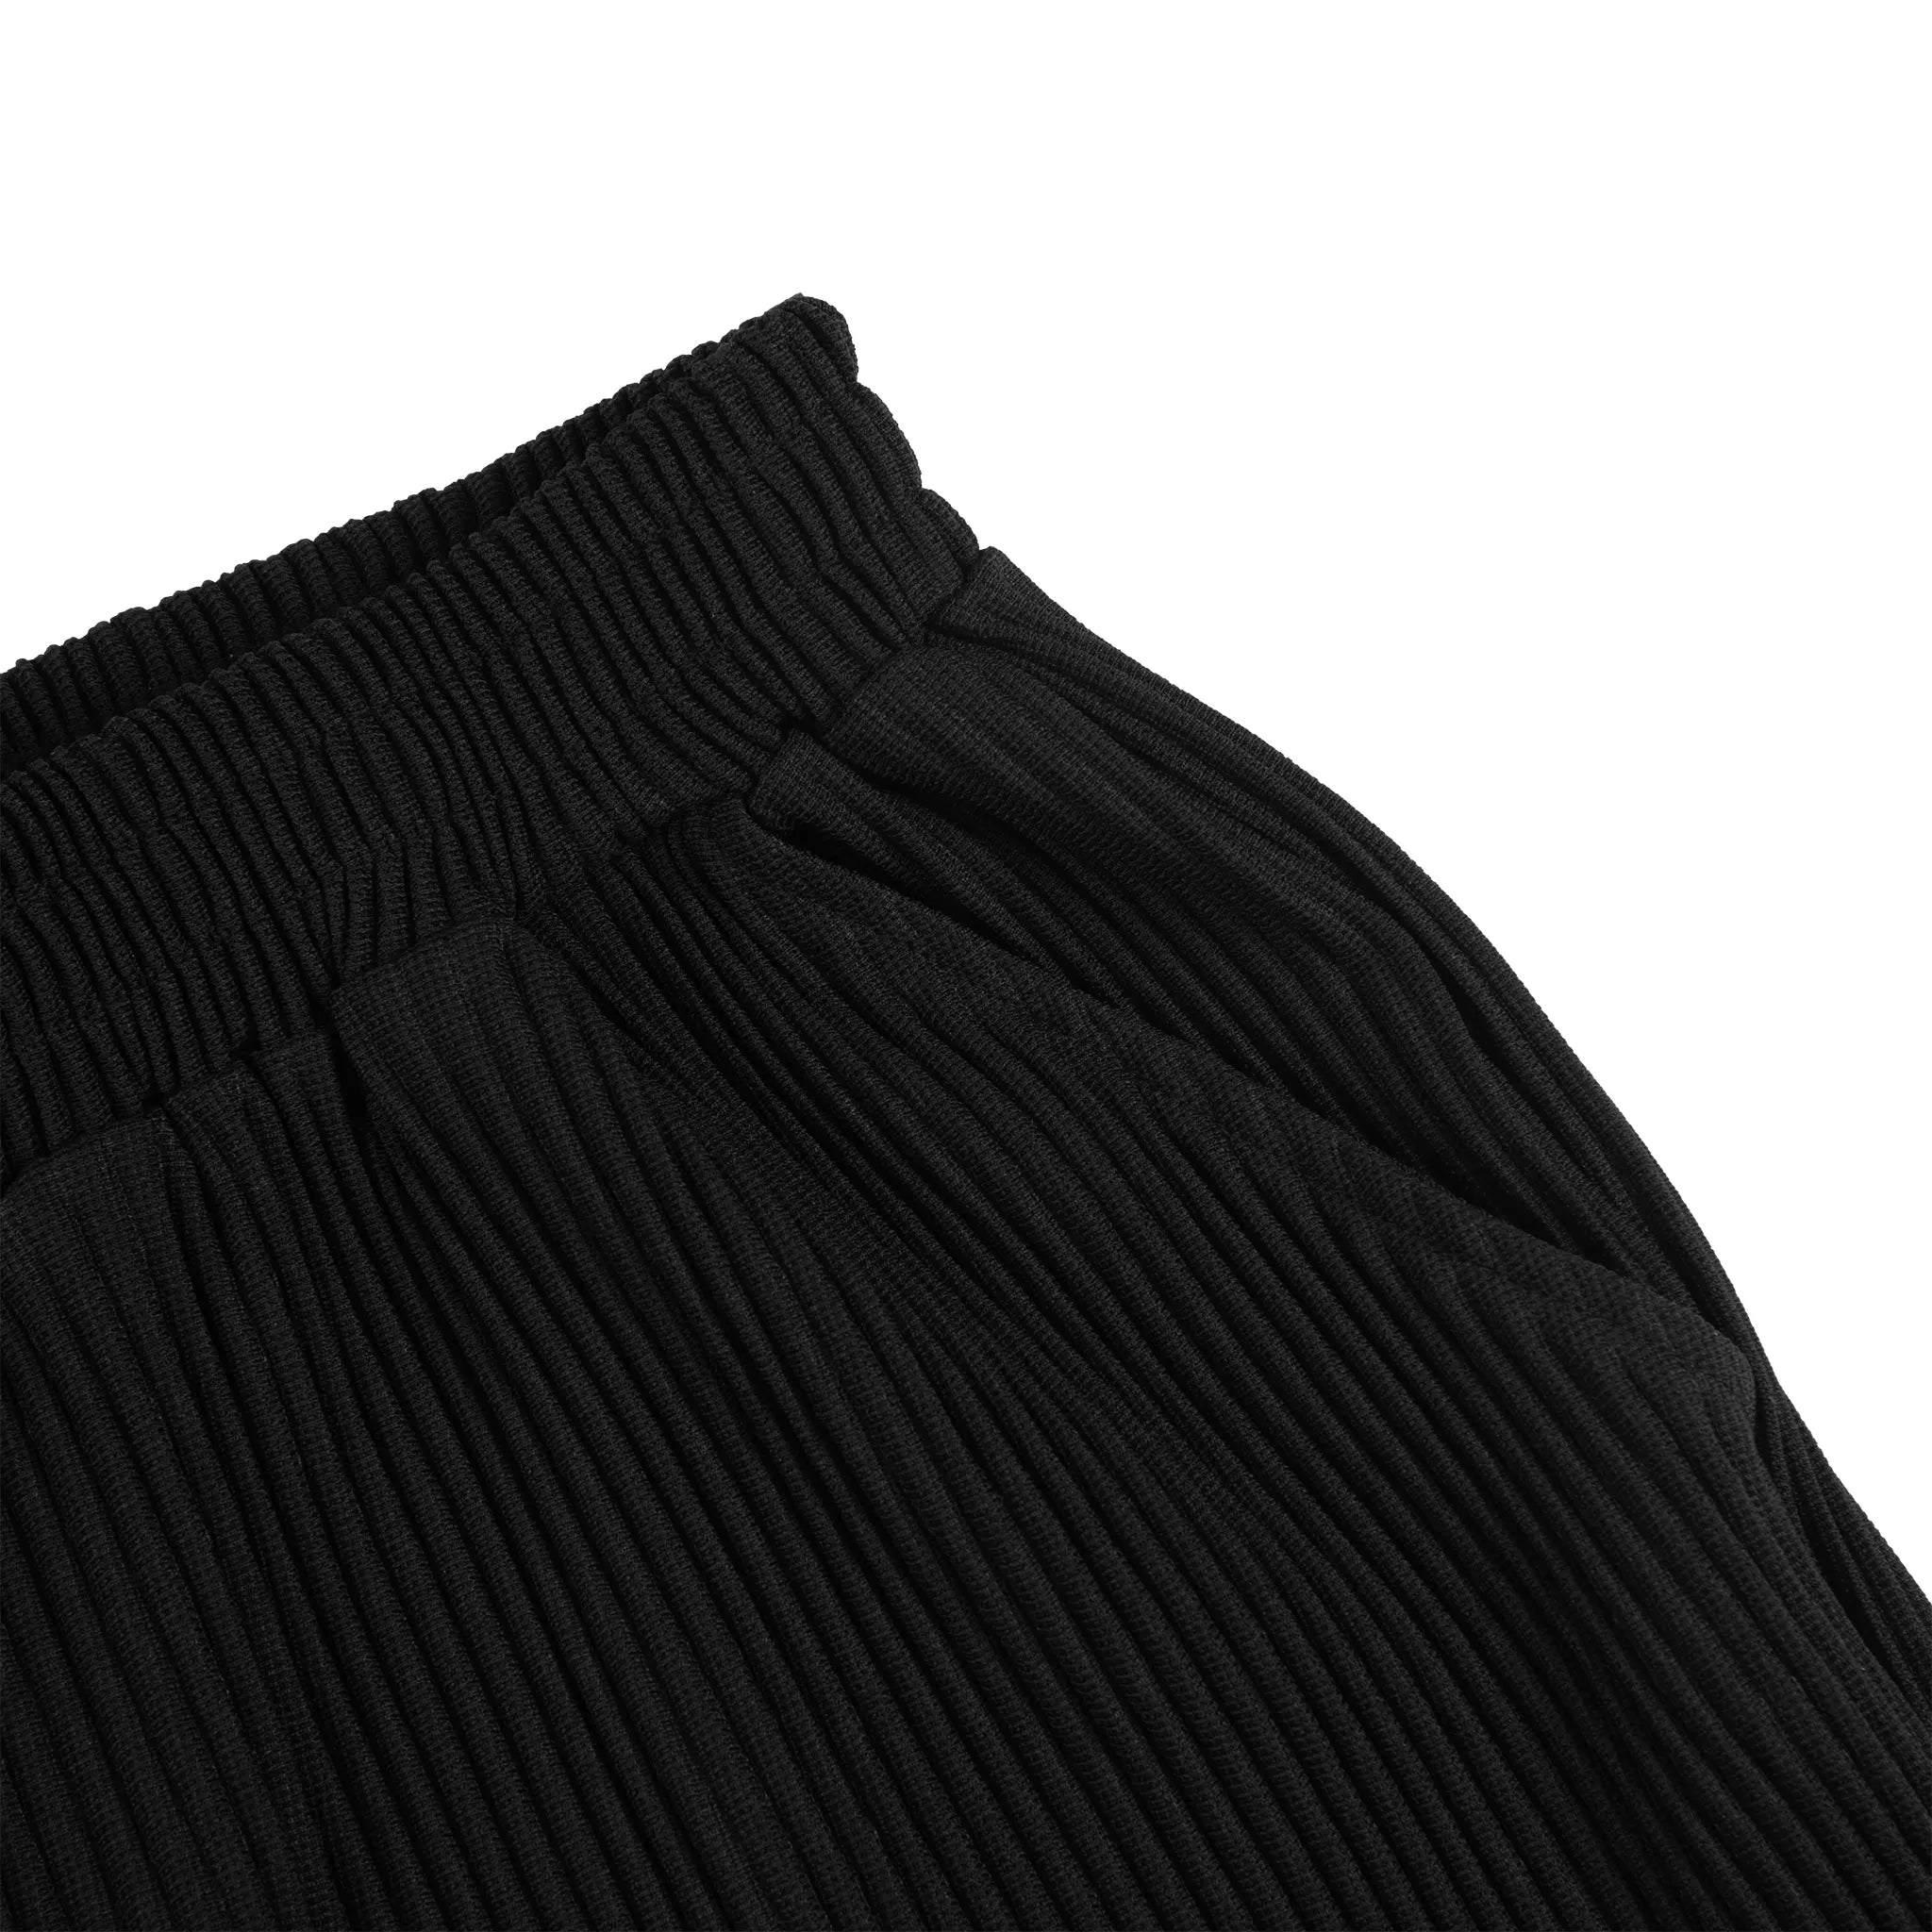 Detail view of Belier Pleated Black Shorts BM-075